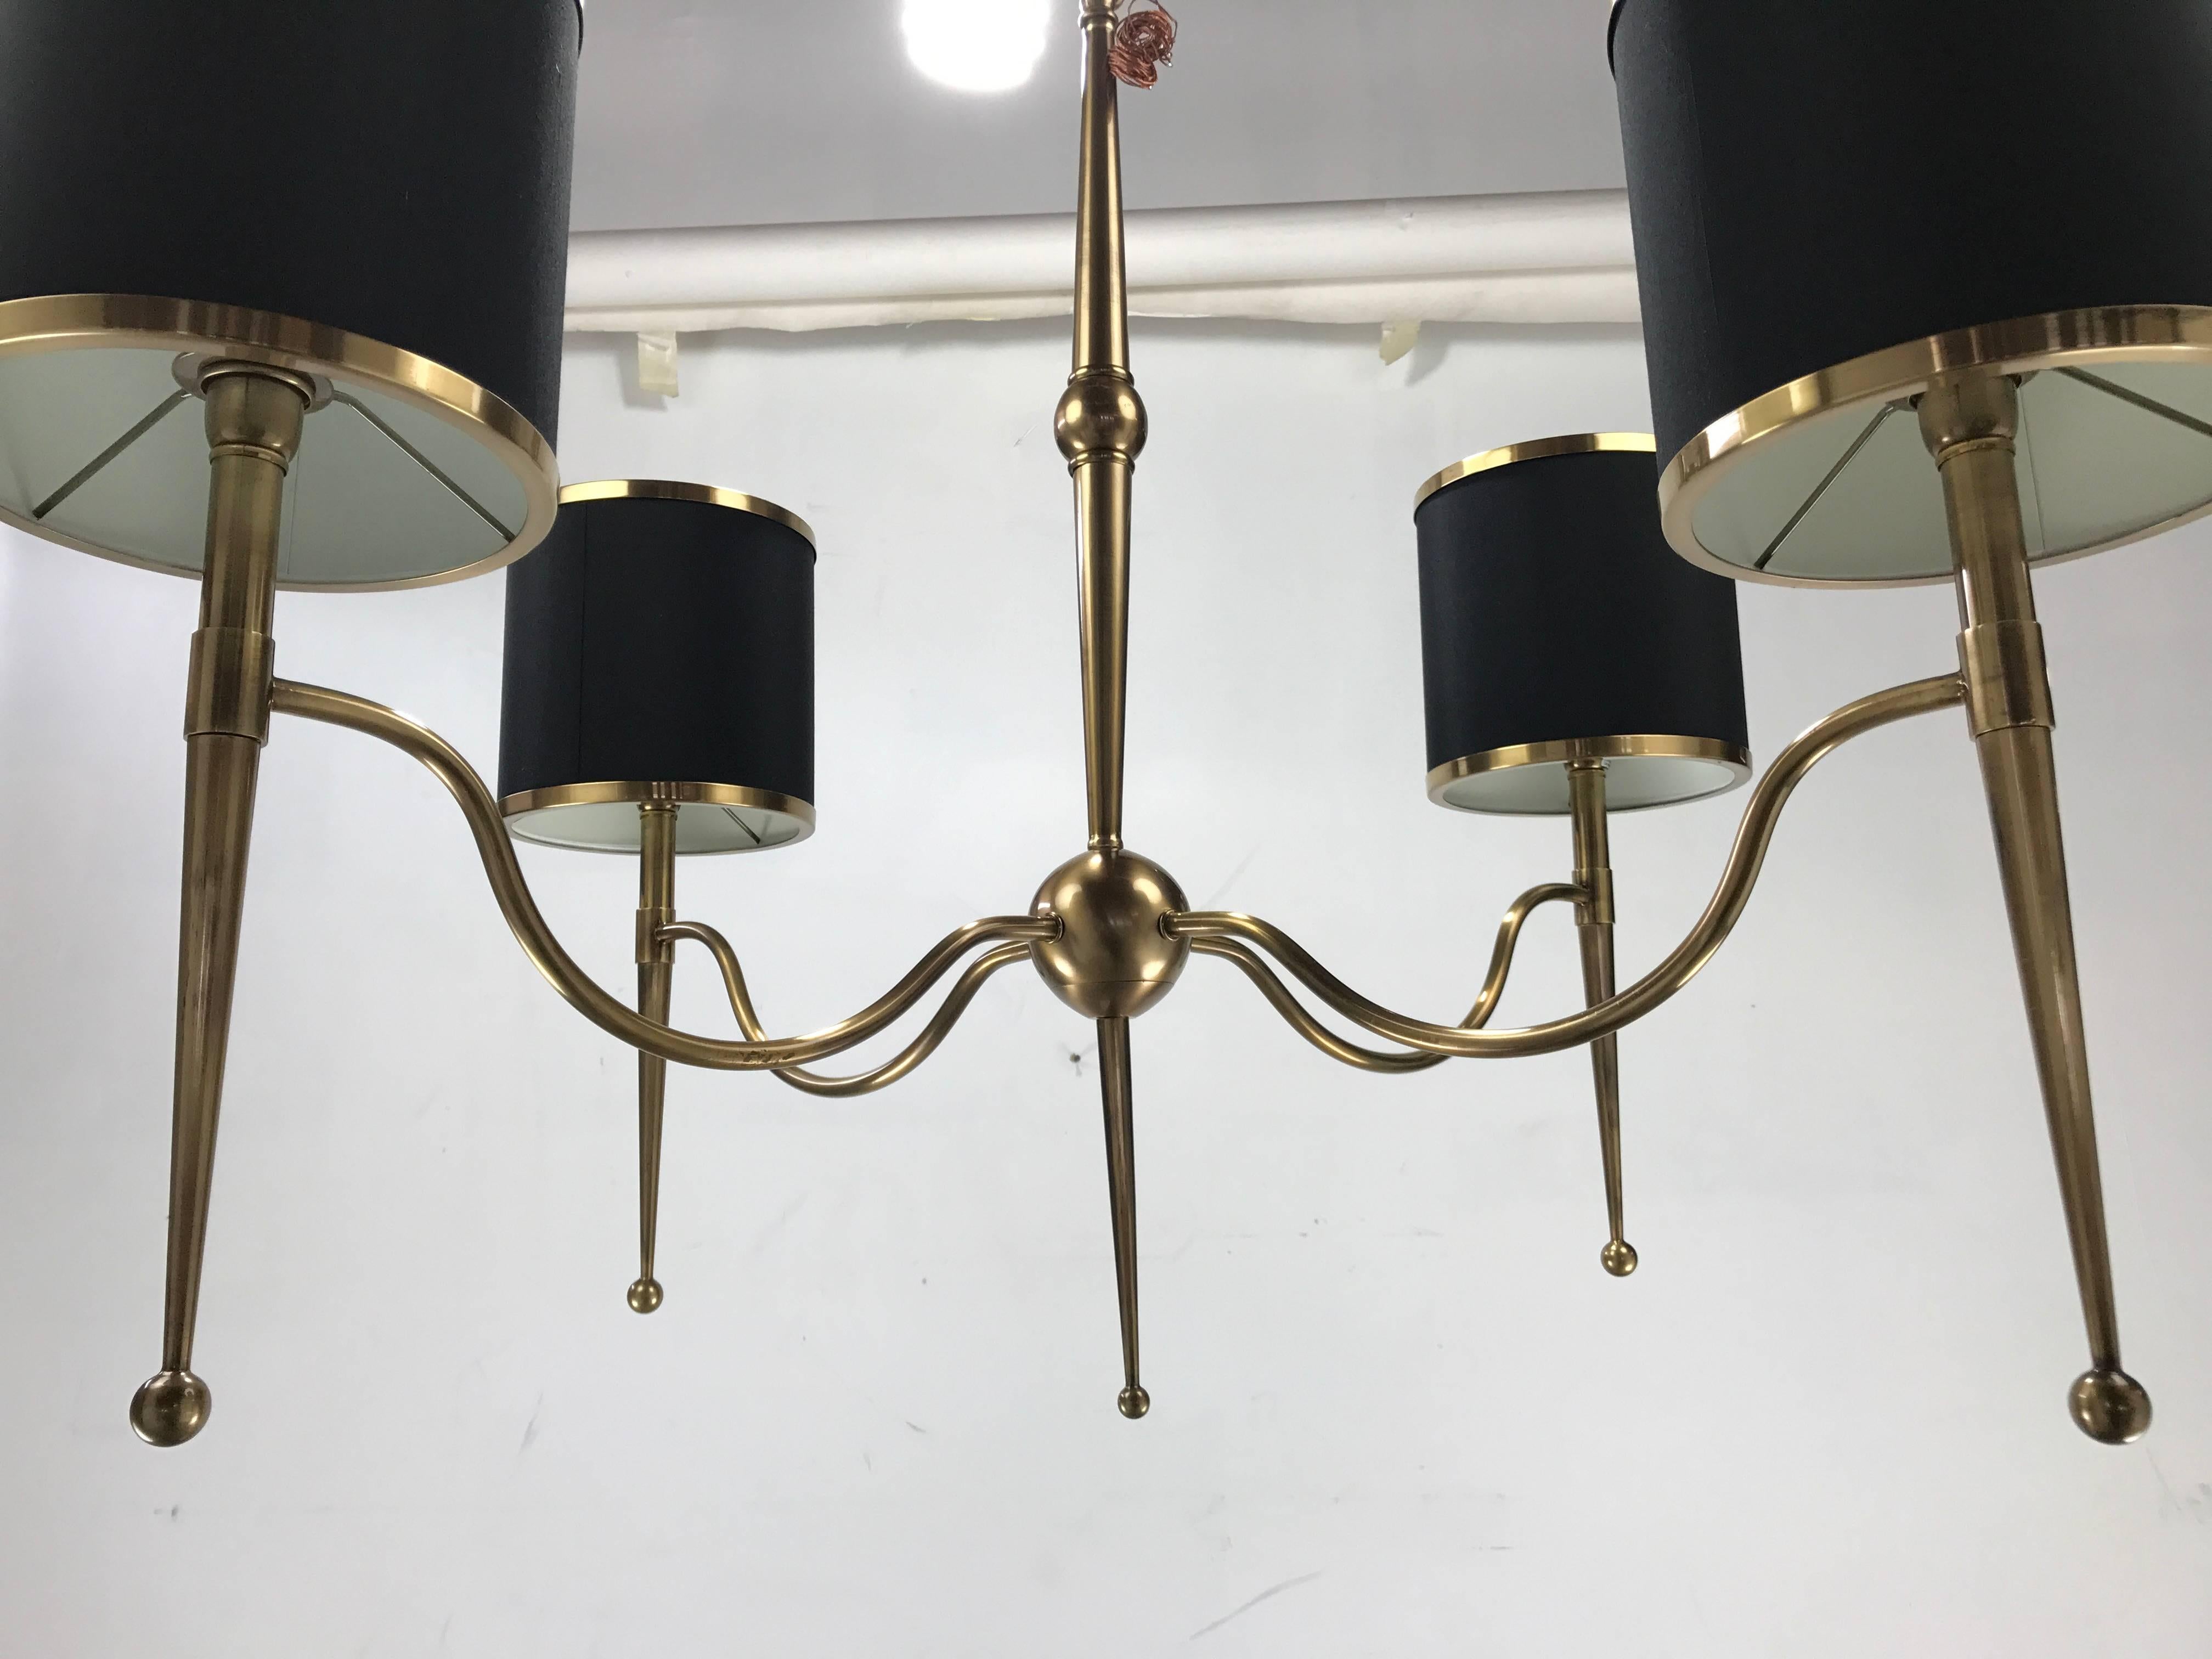 Regency modern four-arm chandelier. Antique bronzed finish, Classic design featuring brass trimmed shades (8in x 8in) tapering brass ball finials reminiscent of high style design by Tommi Parzinger, Gio Ponti and other similar designers.